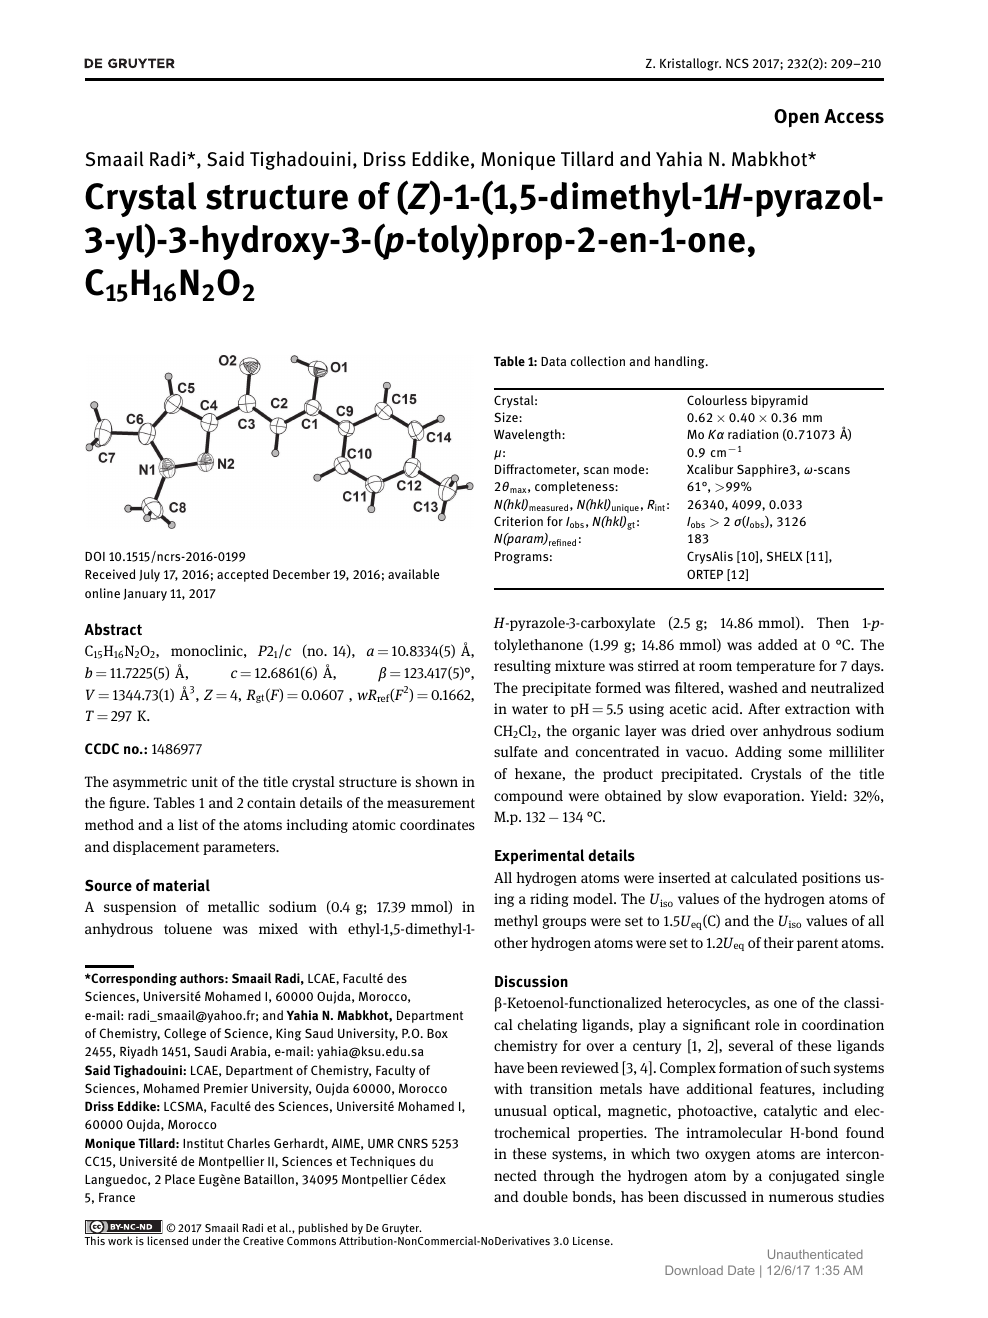 Crystal Structure Of Z 1 1 5 Dimethyl 1h Pyrazol 3 Yl 3 Hydroxy 3 P Toly Prop 2 En 1 One C15h16n2o2 Topic Of Research Paper In Chemical Sciences Download Scholarly Article Pdf And Read For Free On Cyberleninka Open Science Hub